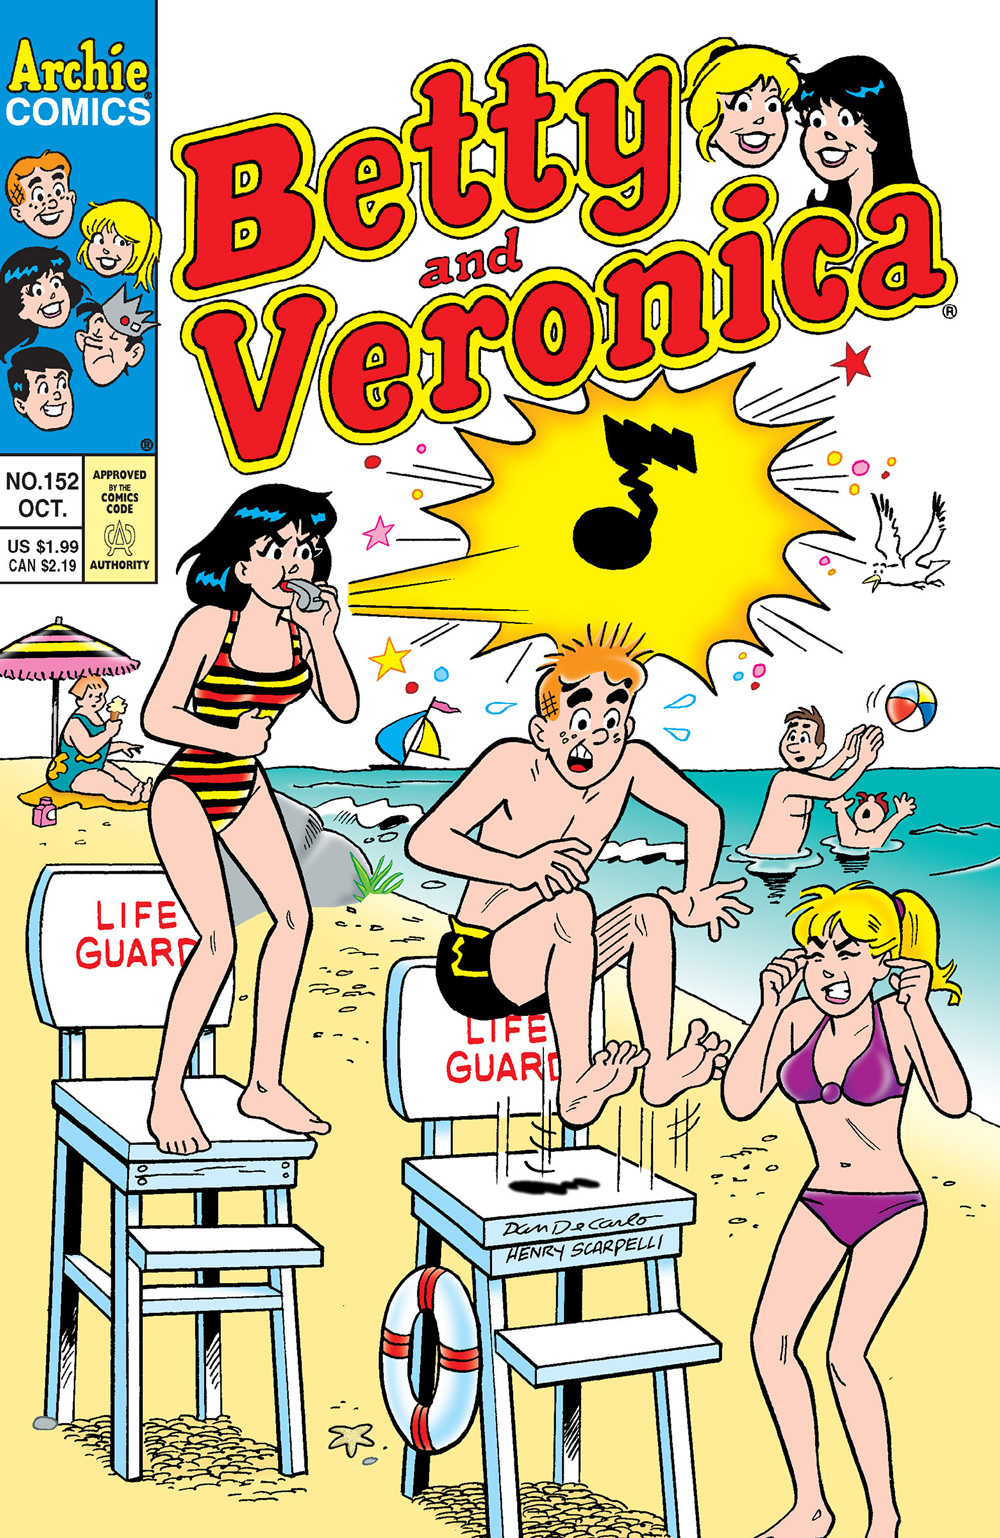 On a beach, Betty and Archie are flirting, so Veronica blows her lifeguard whistly really loudly to interrupt them.